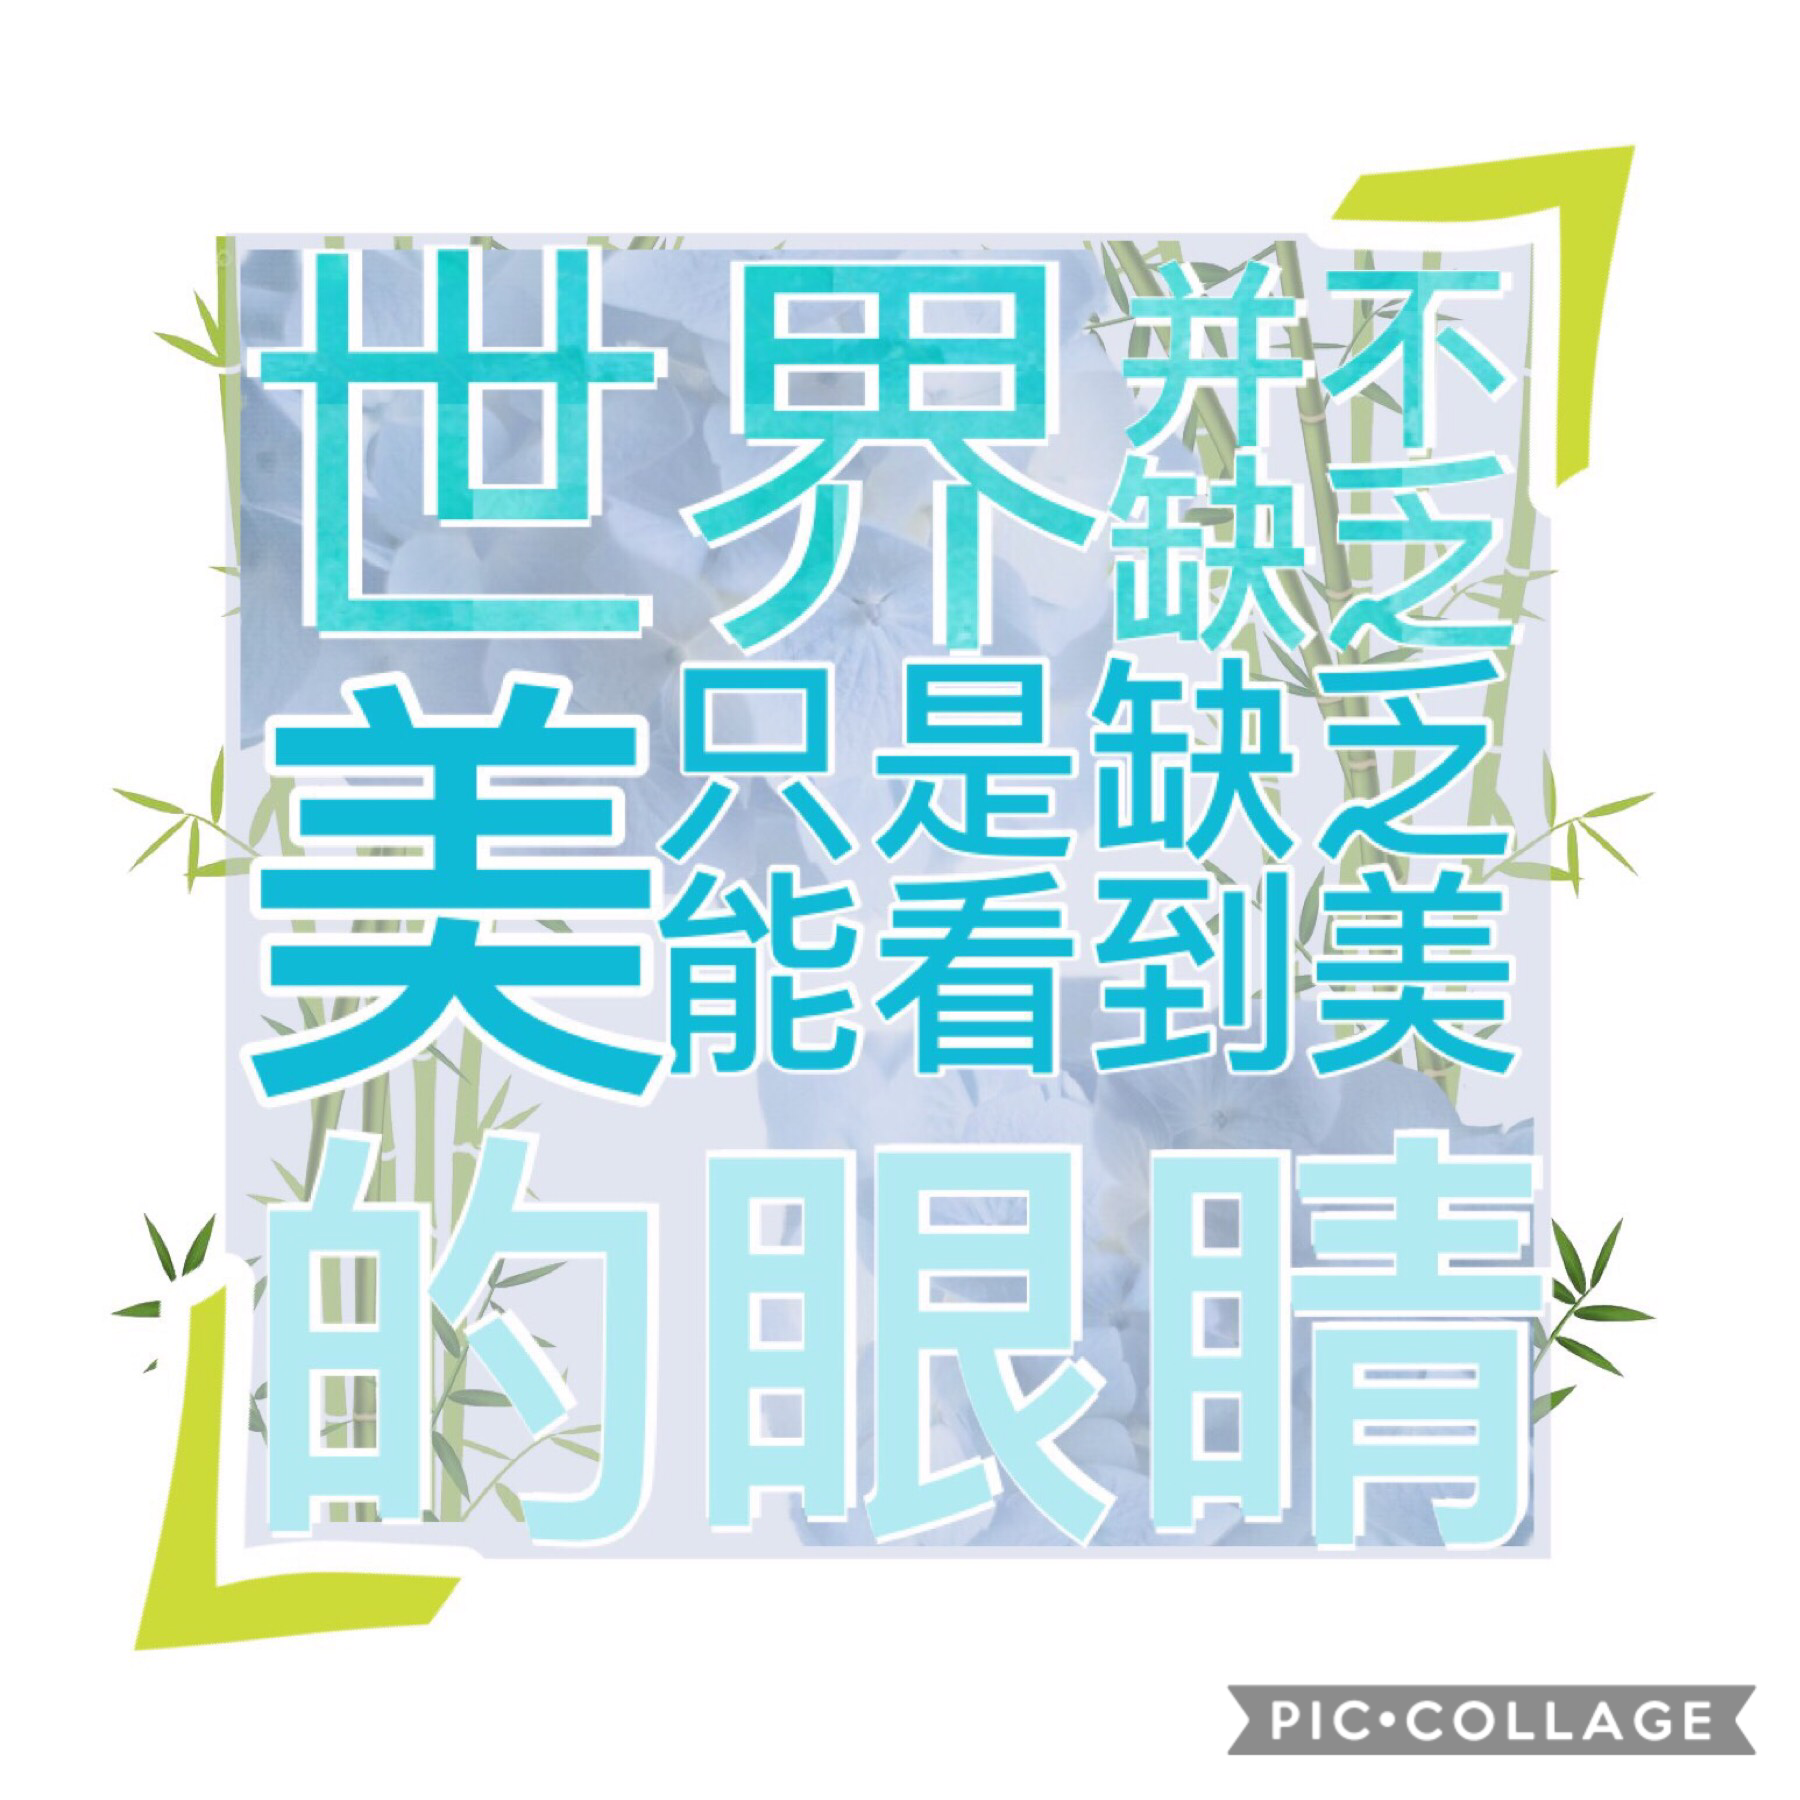 Hi friends I’m having an inspo block so There’s that. Also haven’t posted so.. 

The text says “世界并不缺乏美，只是缺乏能看到美的眼睛” 

It means that the world is pretty but we lack the eyes that can notice that beauty 